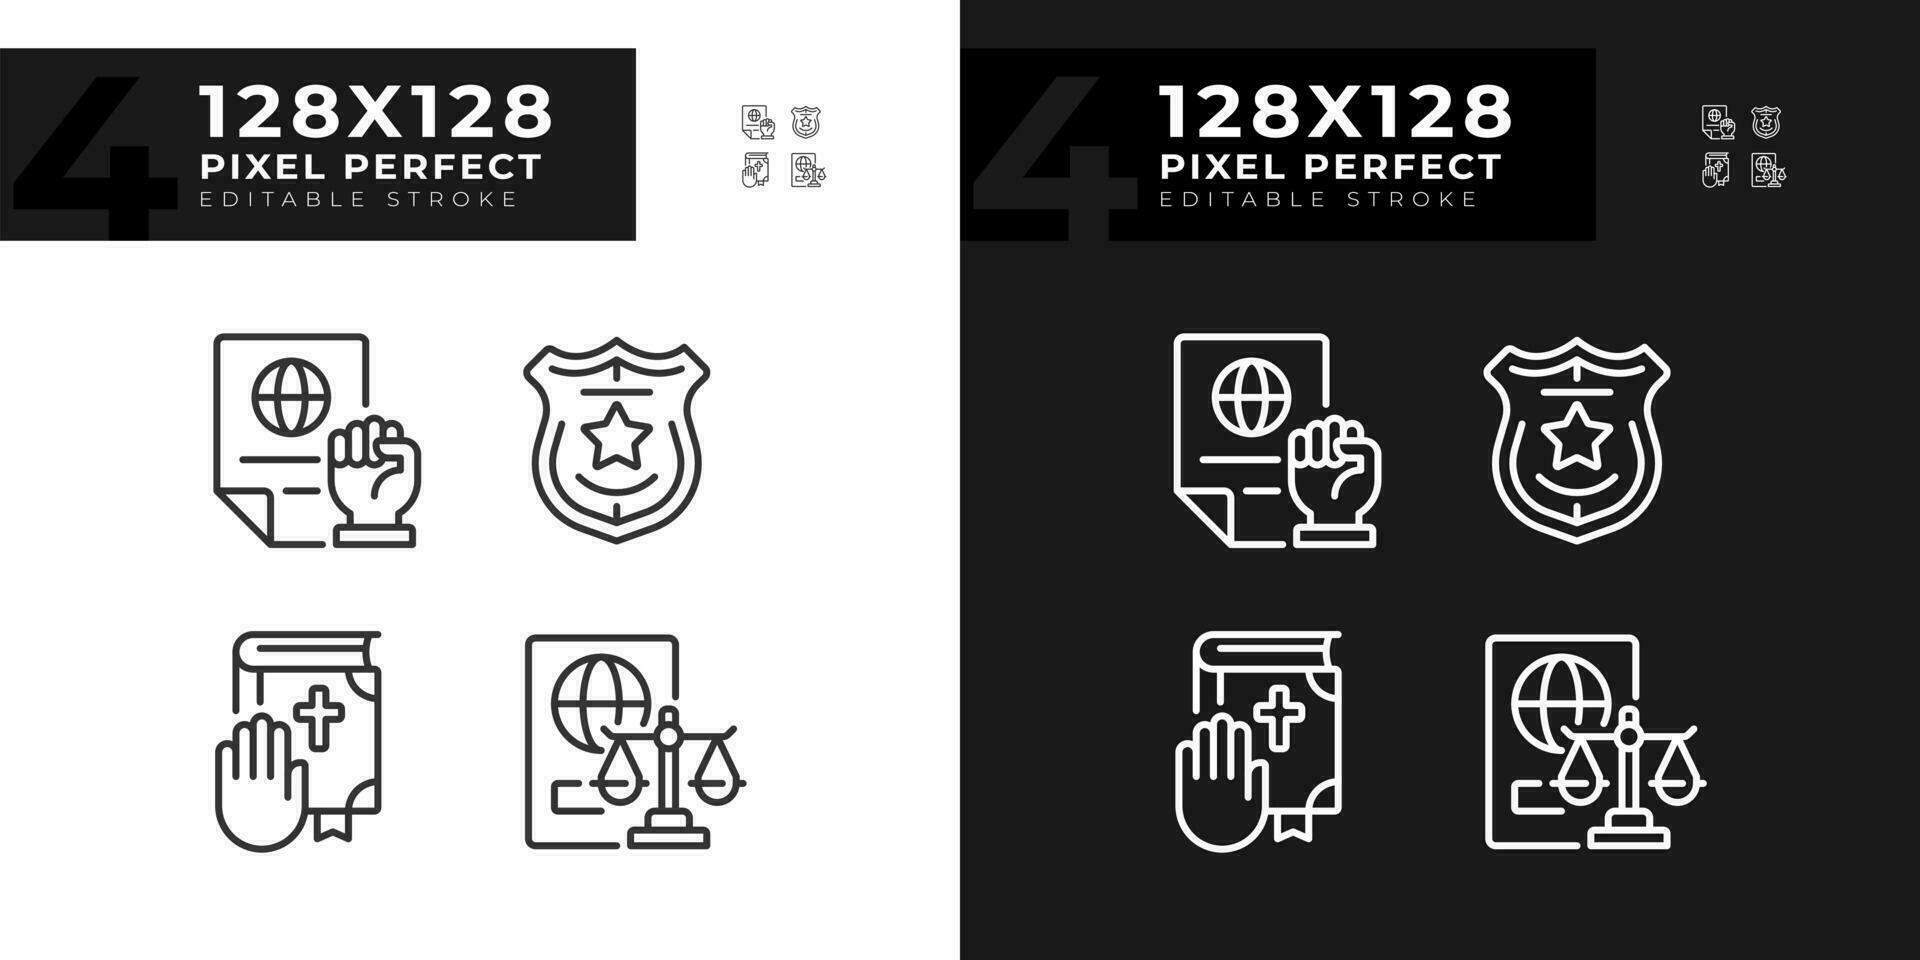 Low protecting human rights pixel perfect linear icons set for dark, light mode. Equality in justice system. Order. Thin line symbols for night, day theme. Isolated illustrations. Editable stroke vector